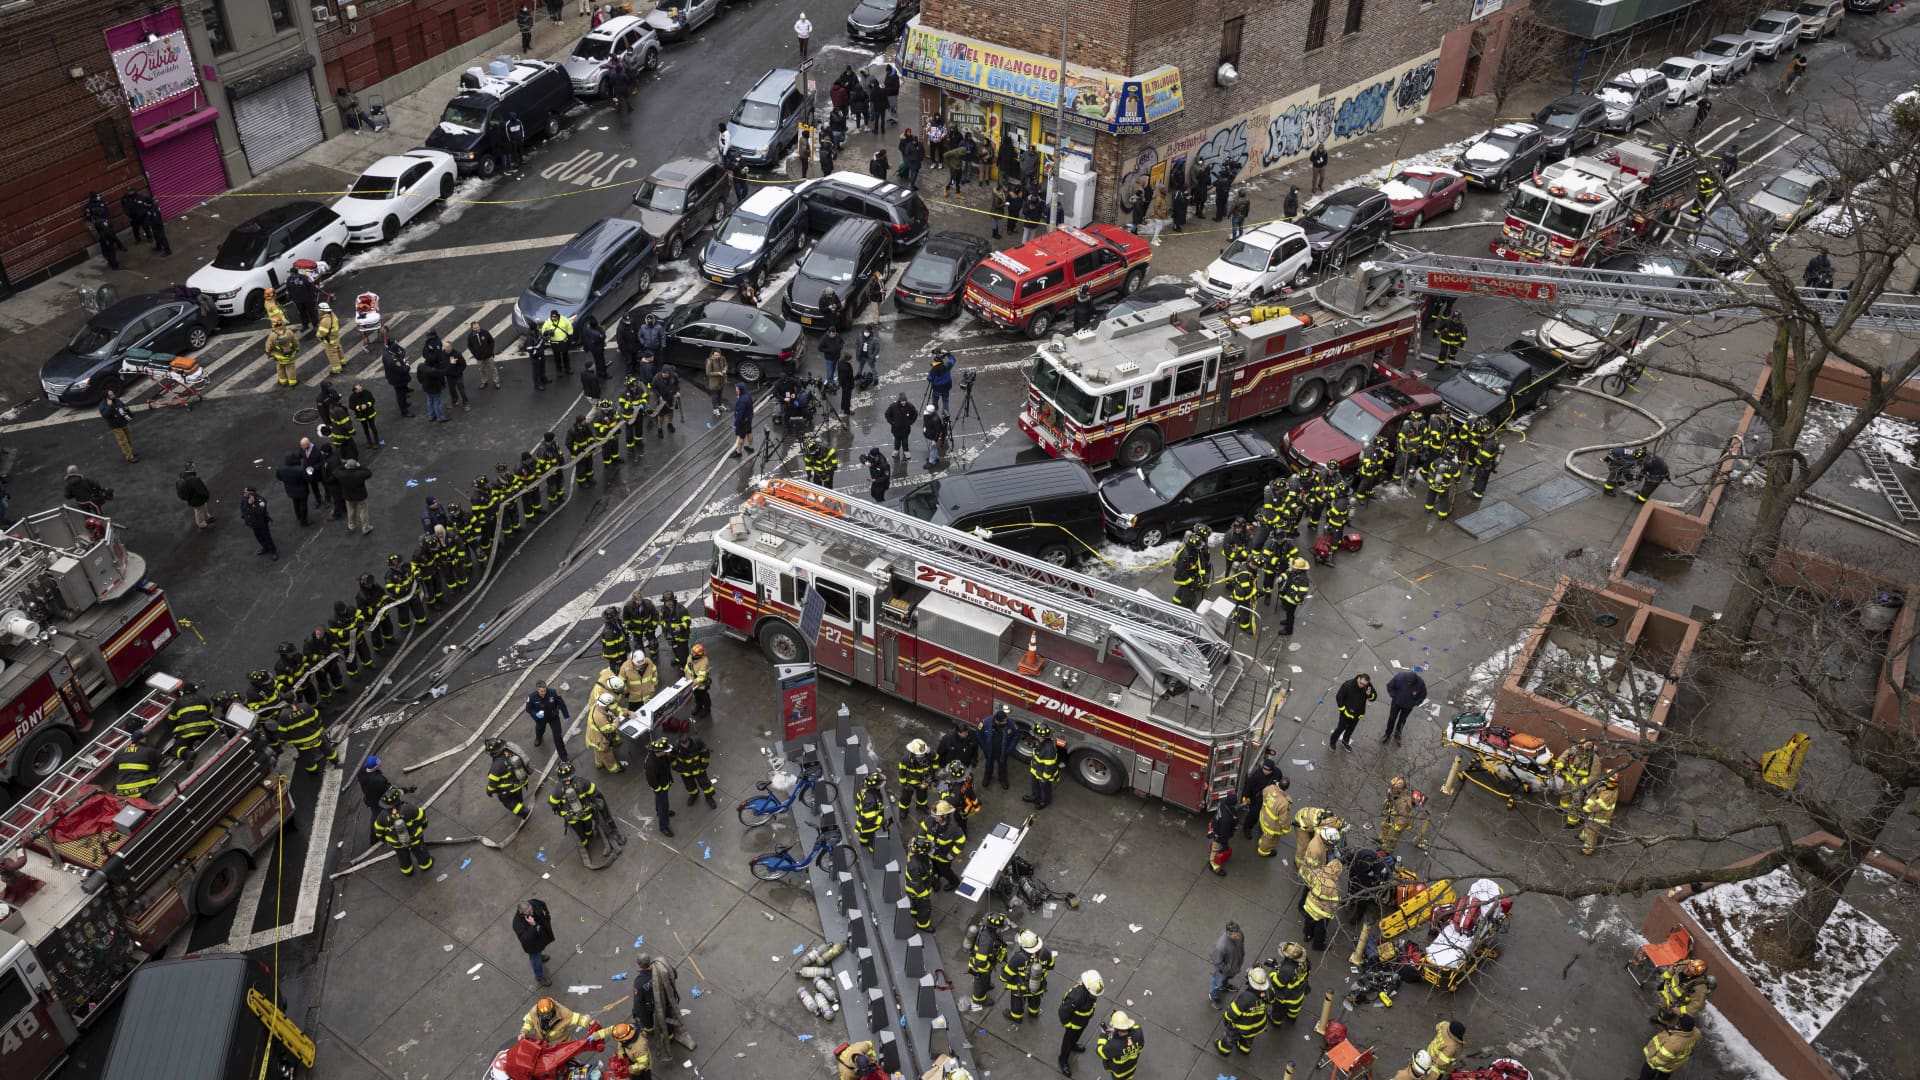 Firefighters work outside an apartment building after a fire in the Bronx, Sunday, Jan. 9, 2022, in New York.